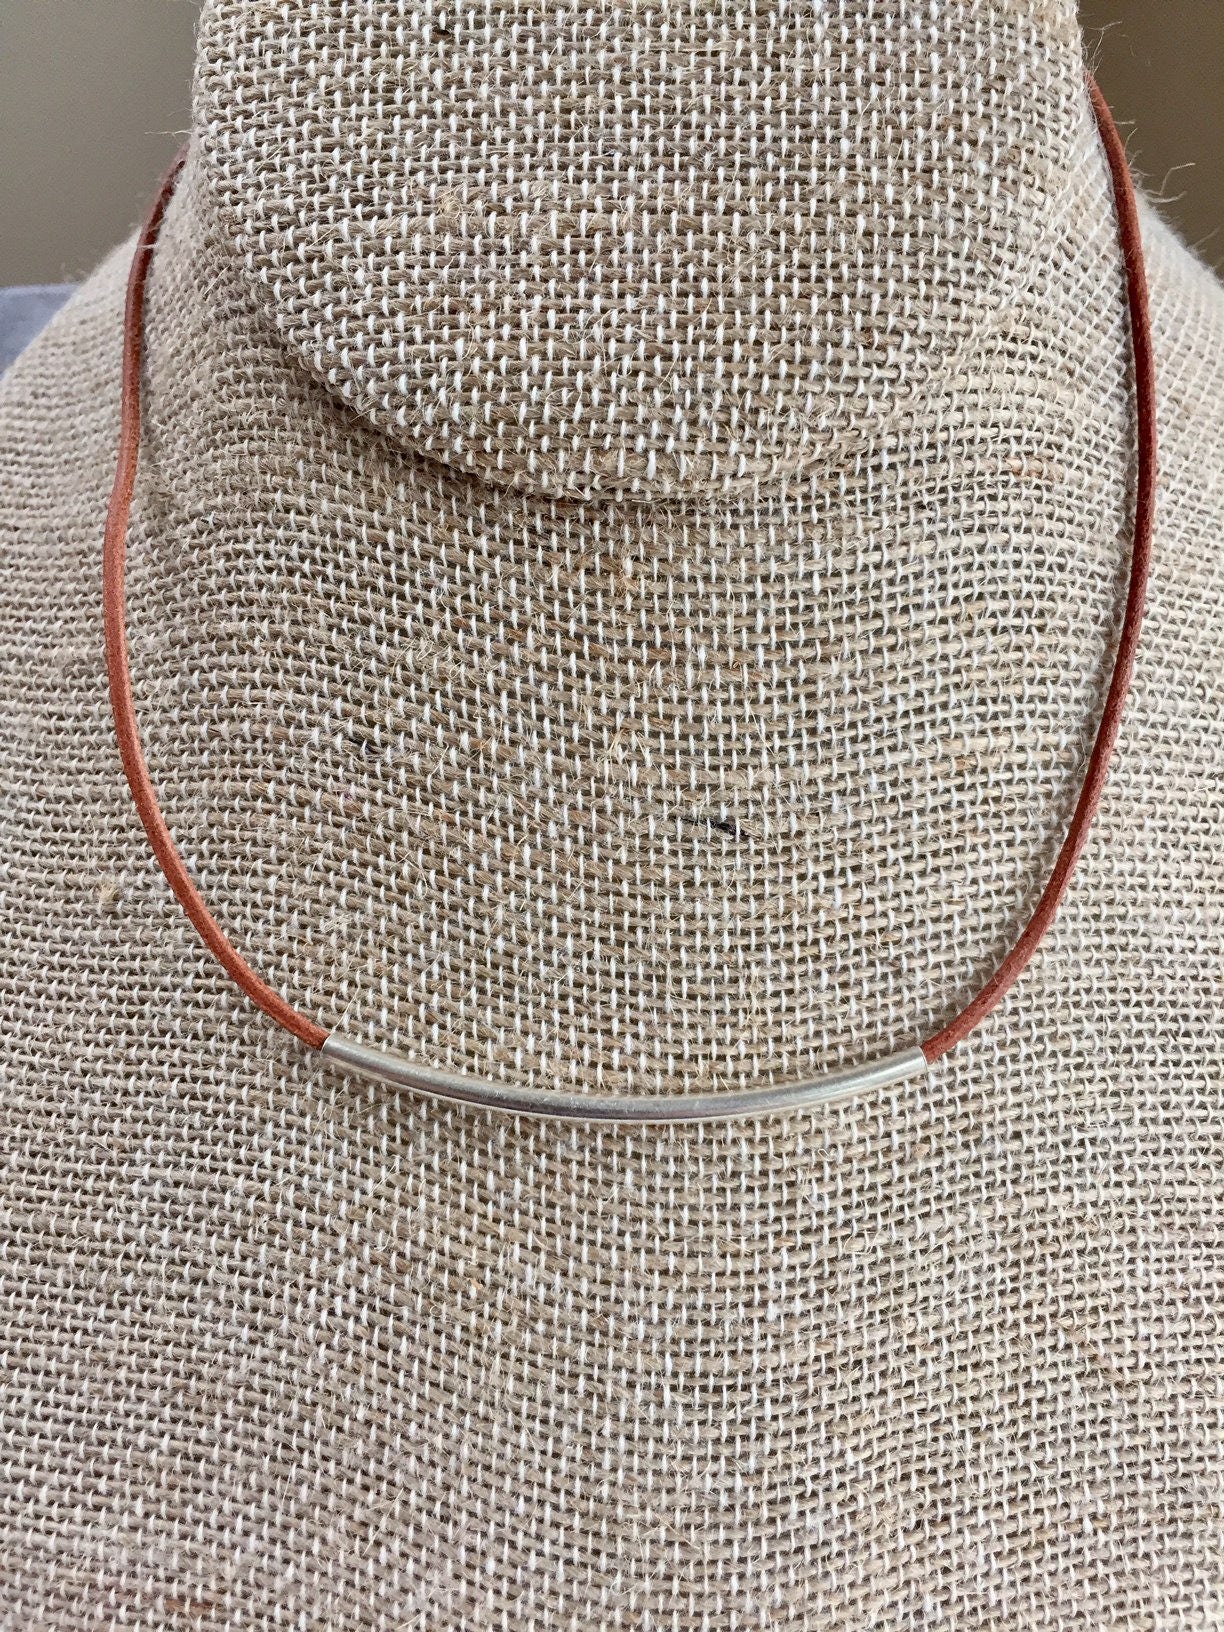 Leather Necklace. Sterling sliver choker necklace with curved tube strung on soft beautiful leather with sterling clasp